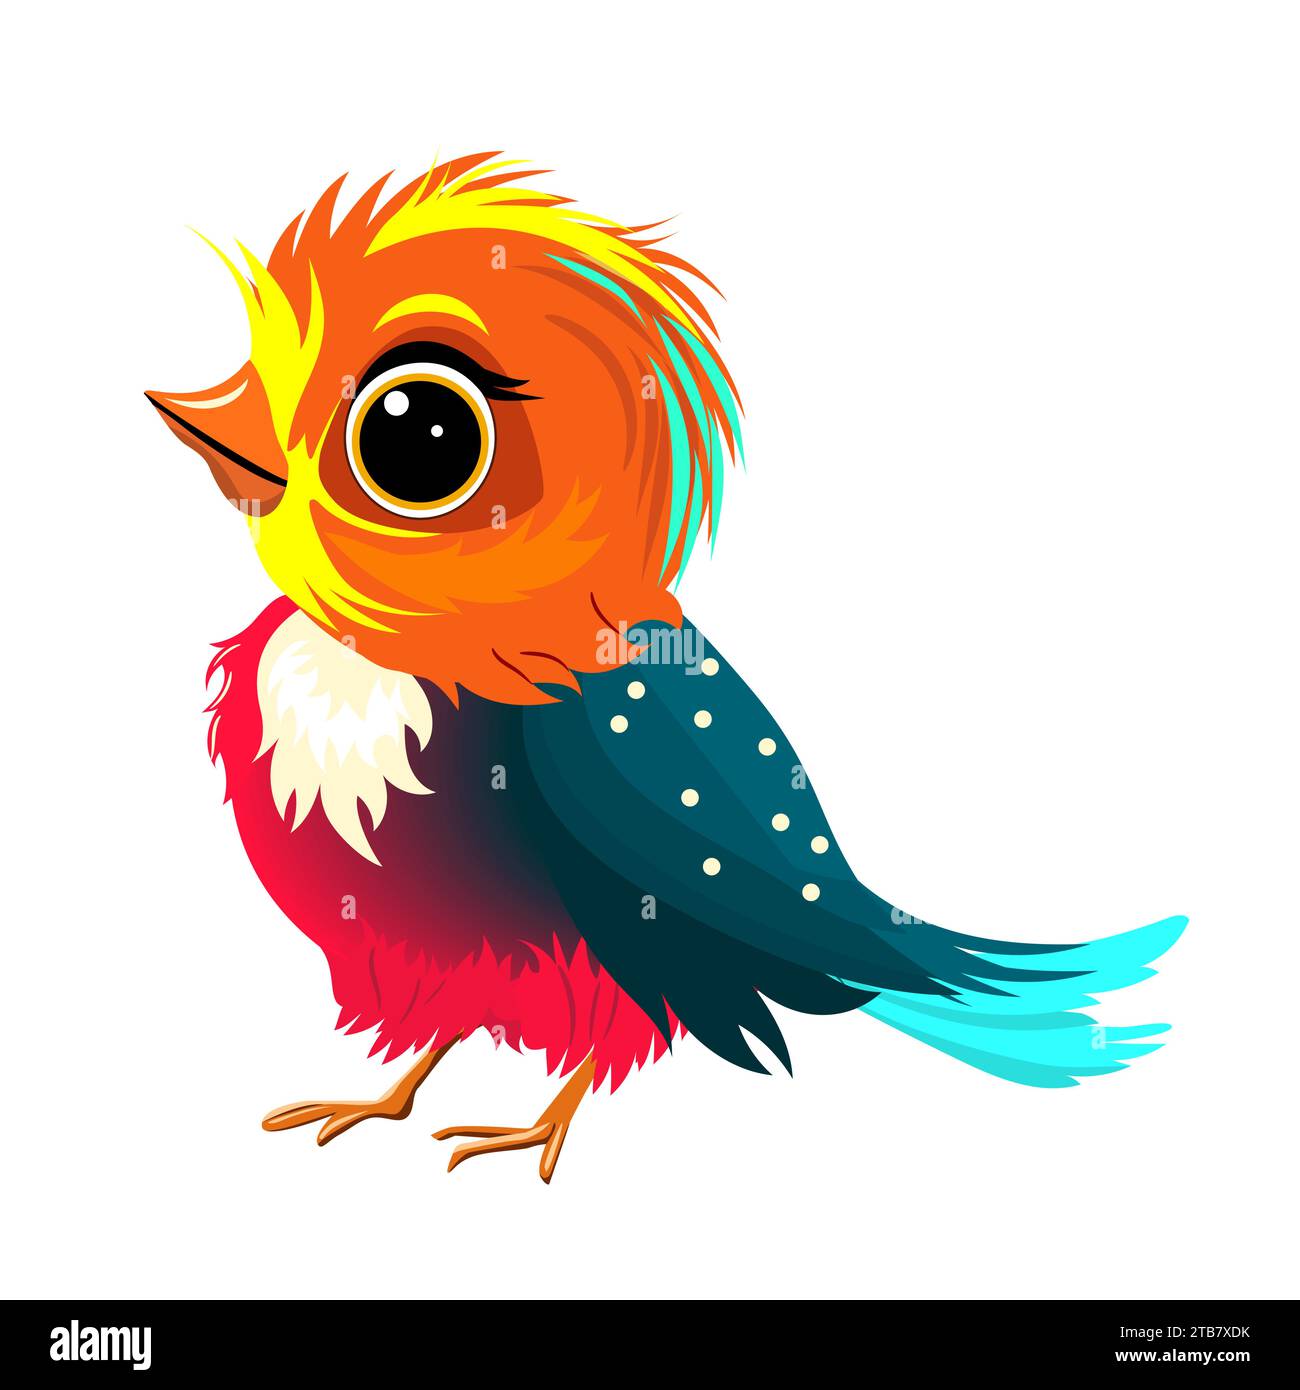 Cartoon little bird, painted with bright colors, with multi-colored plumage, on a white background. Stock Vector